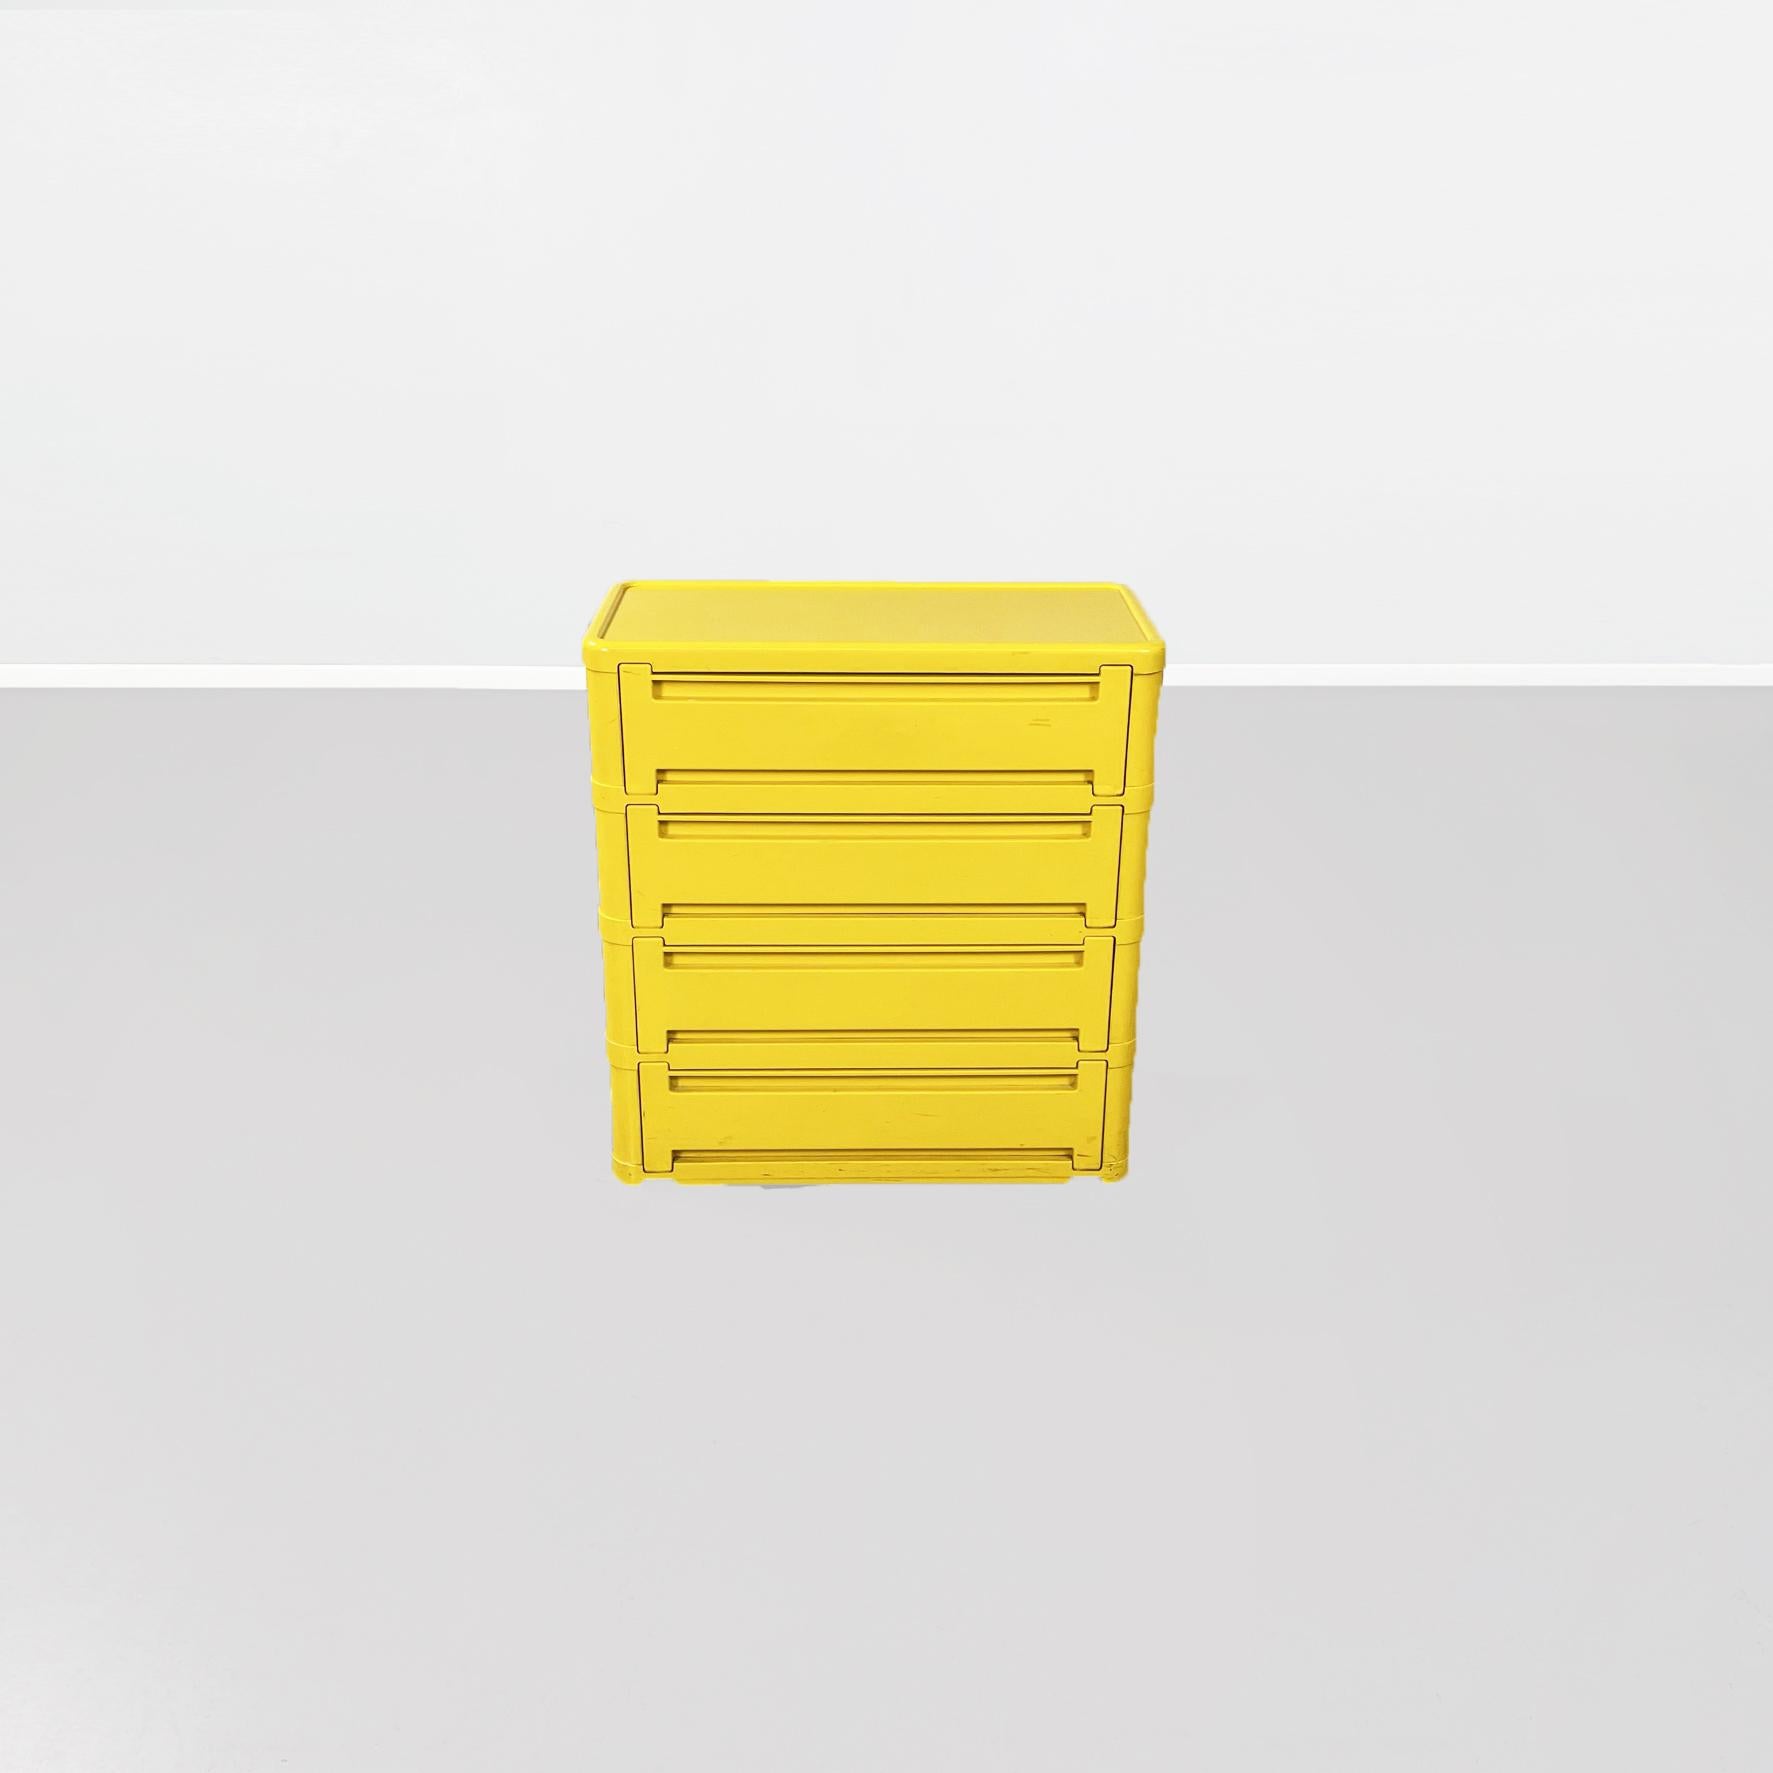 Modular yellow plastic chest of drawers, with hinged opening, usable as shoe rack.

Designed by Olaf Von Bohr for Kartell, logo present on the individual pieces.

1970s.

Good condition, light signs of aging

Measurements: 73 x 33.5 x 76.5 H